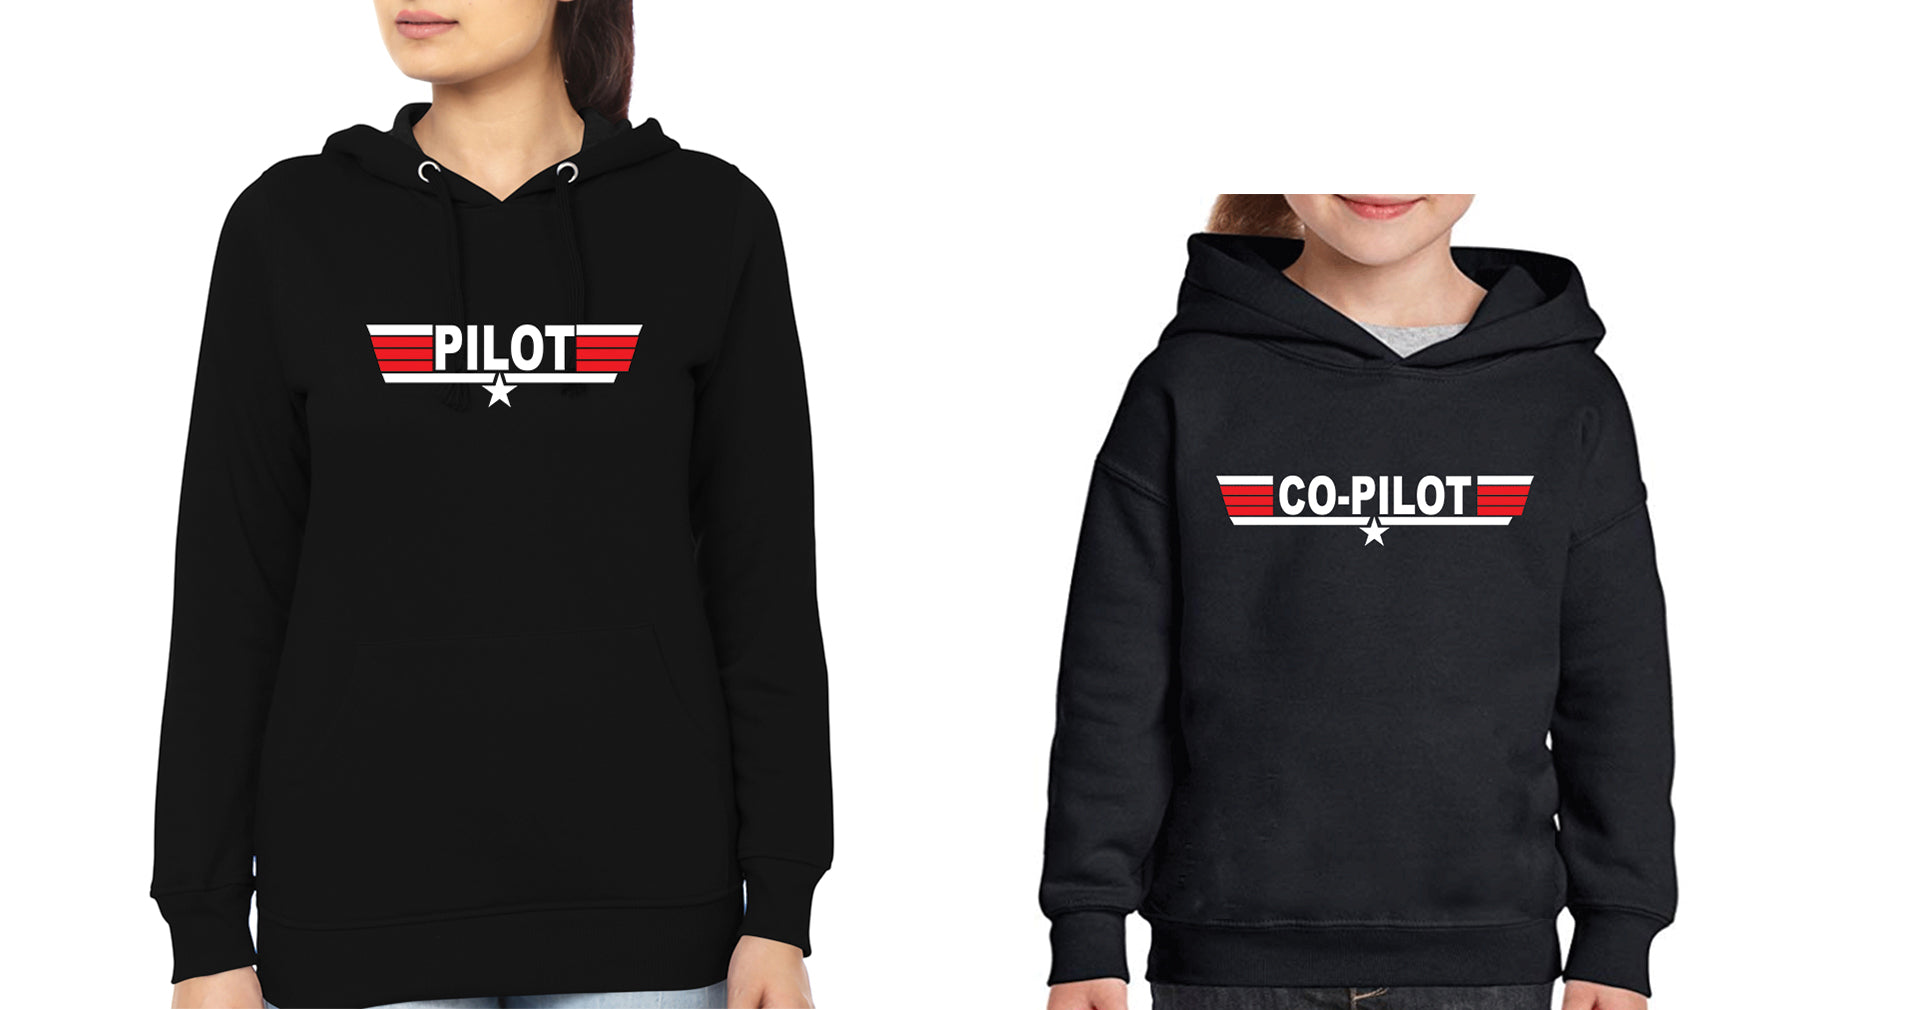 Pilot & Co-Pilot Mother and Daughter Matching Hoodies- FunkyTradition